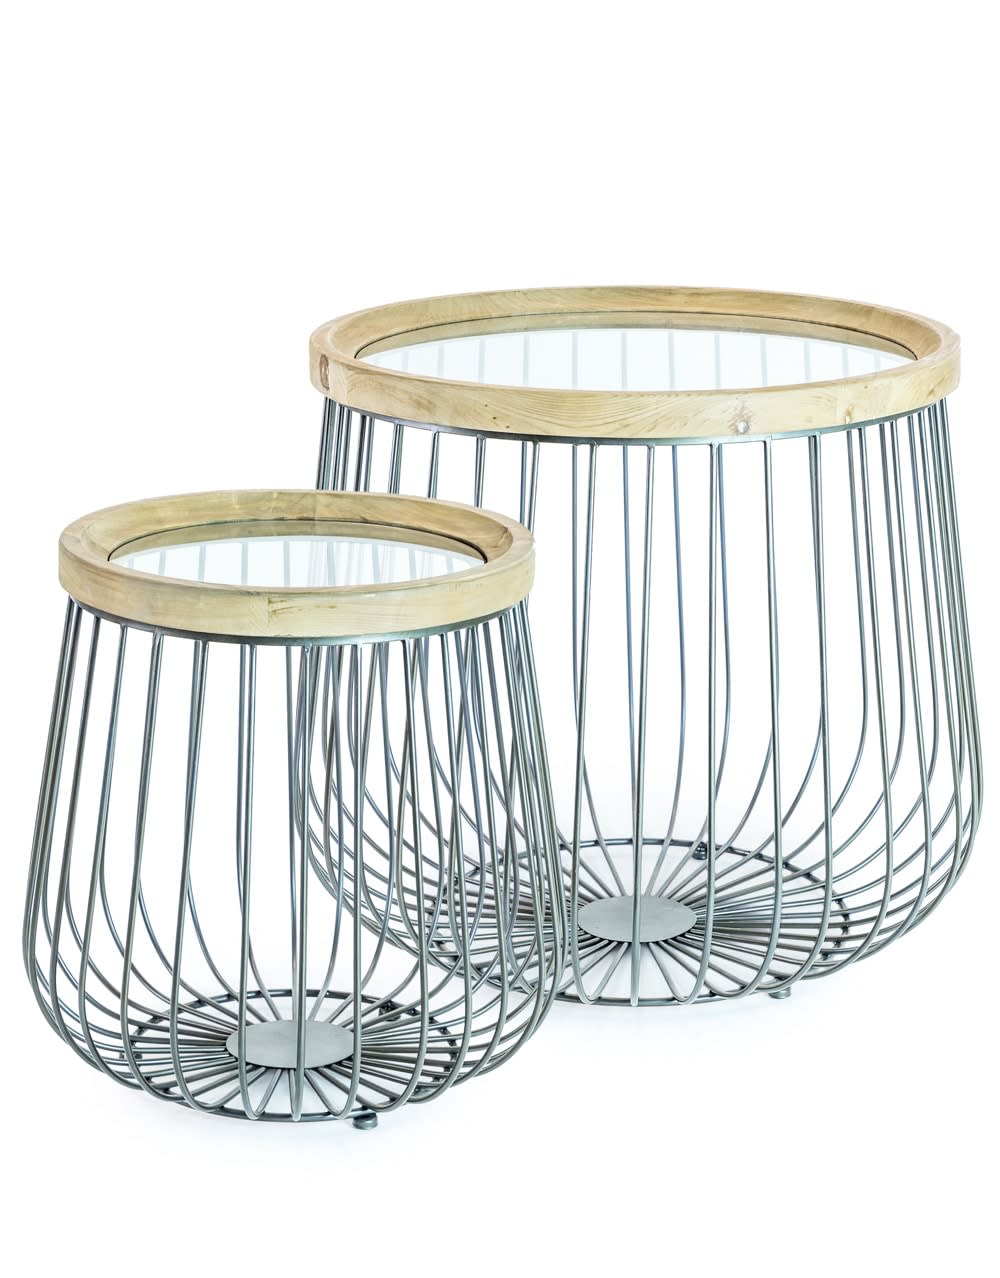 Set of 2 Glass Top Iron Basket Side Tables